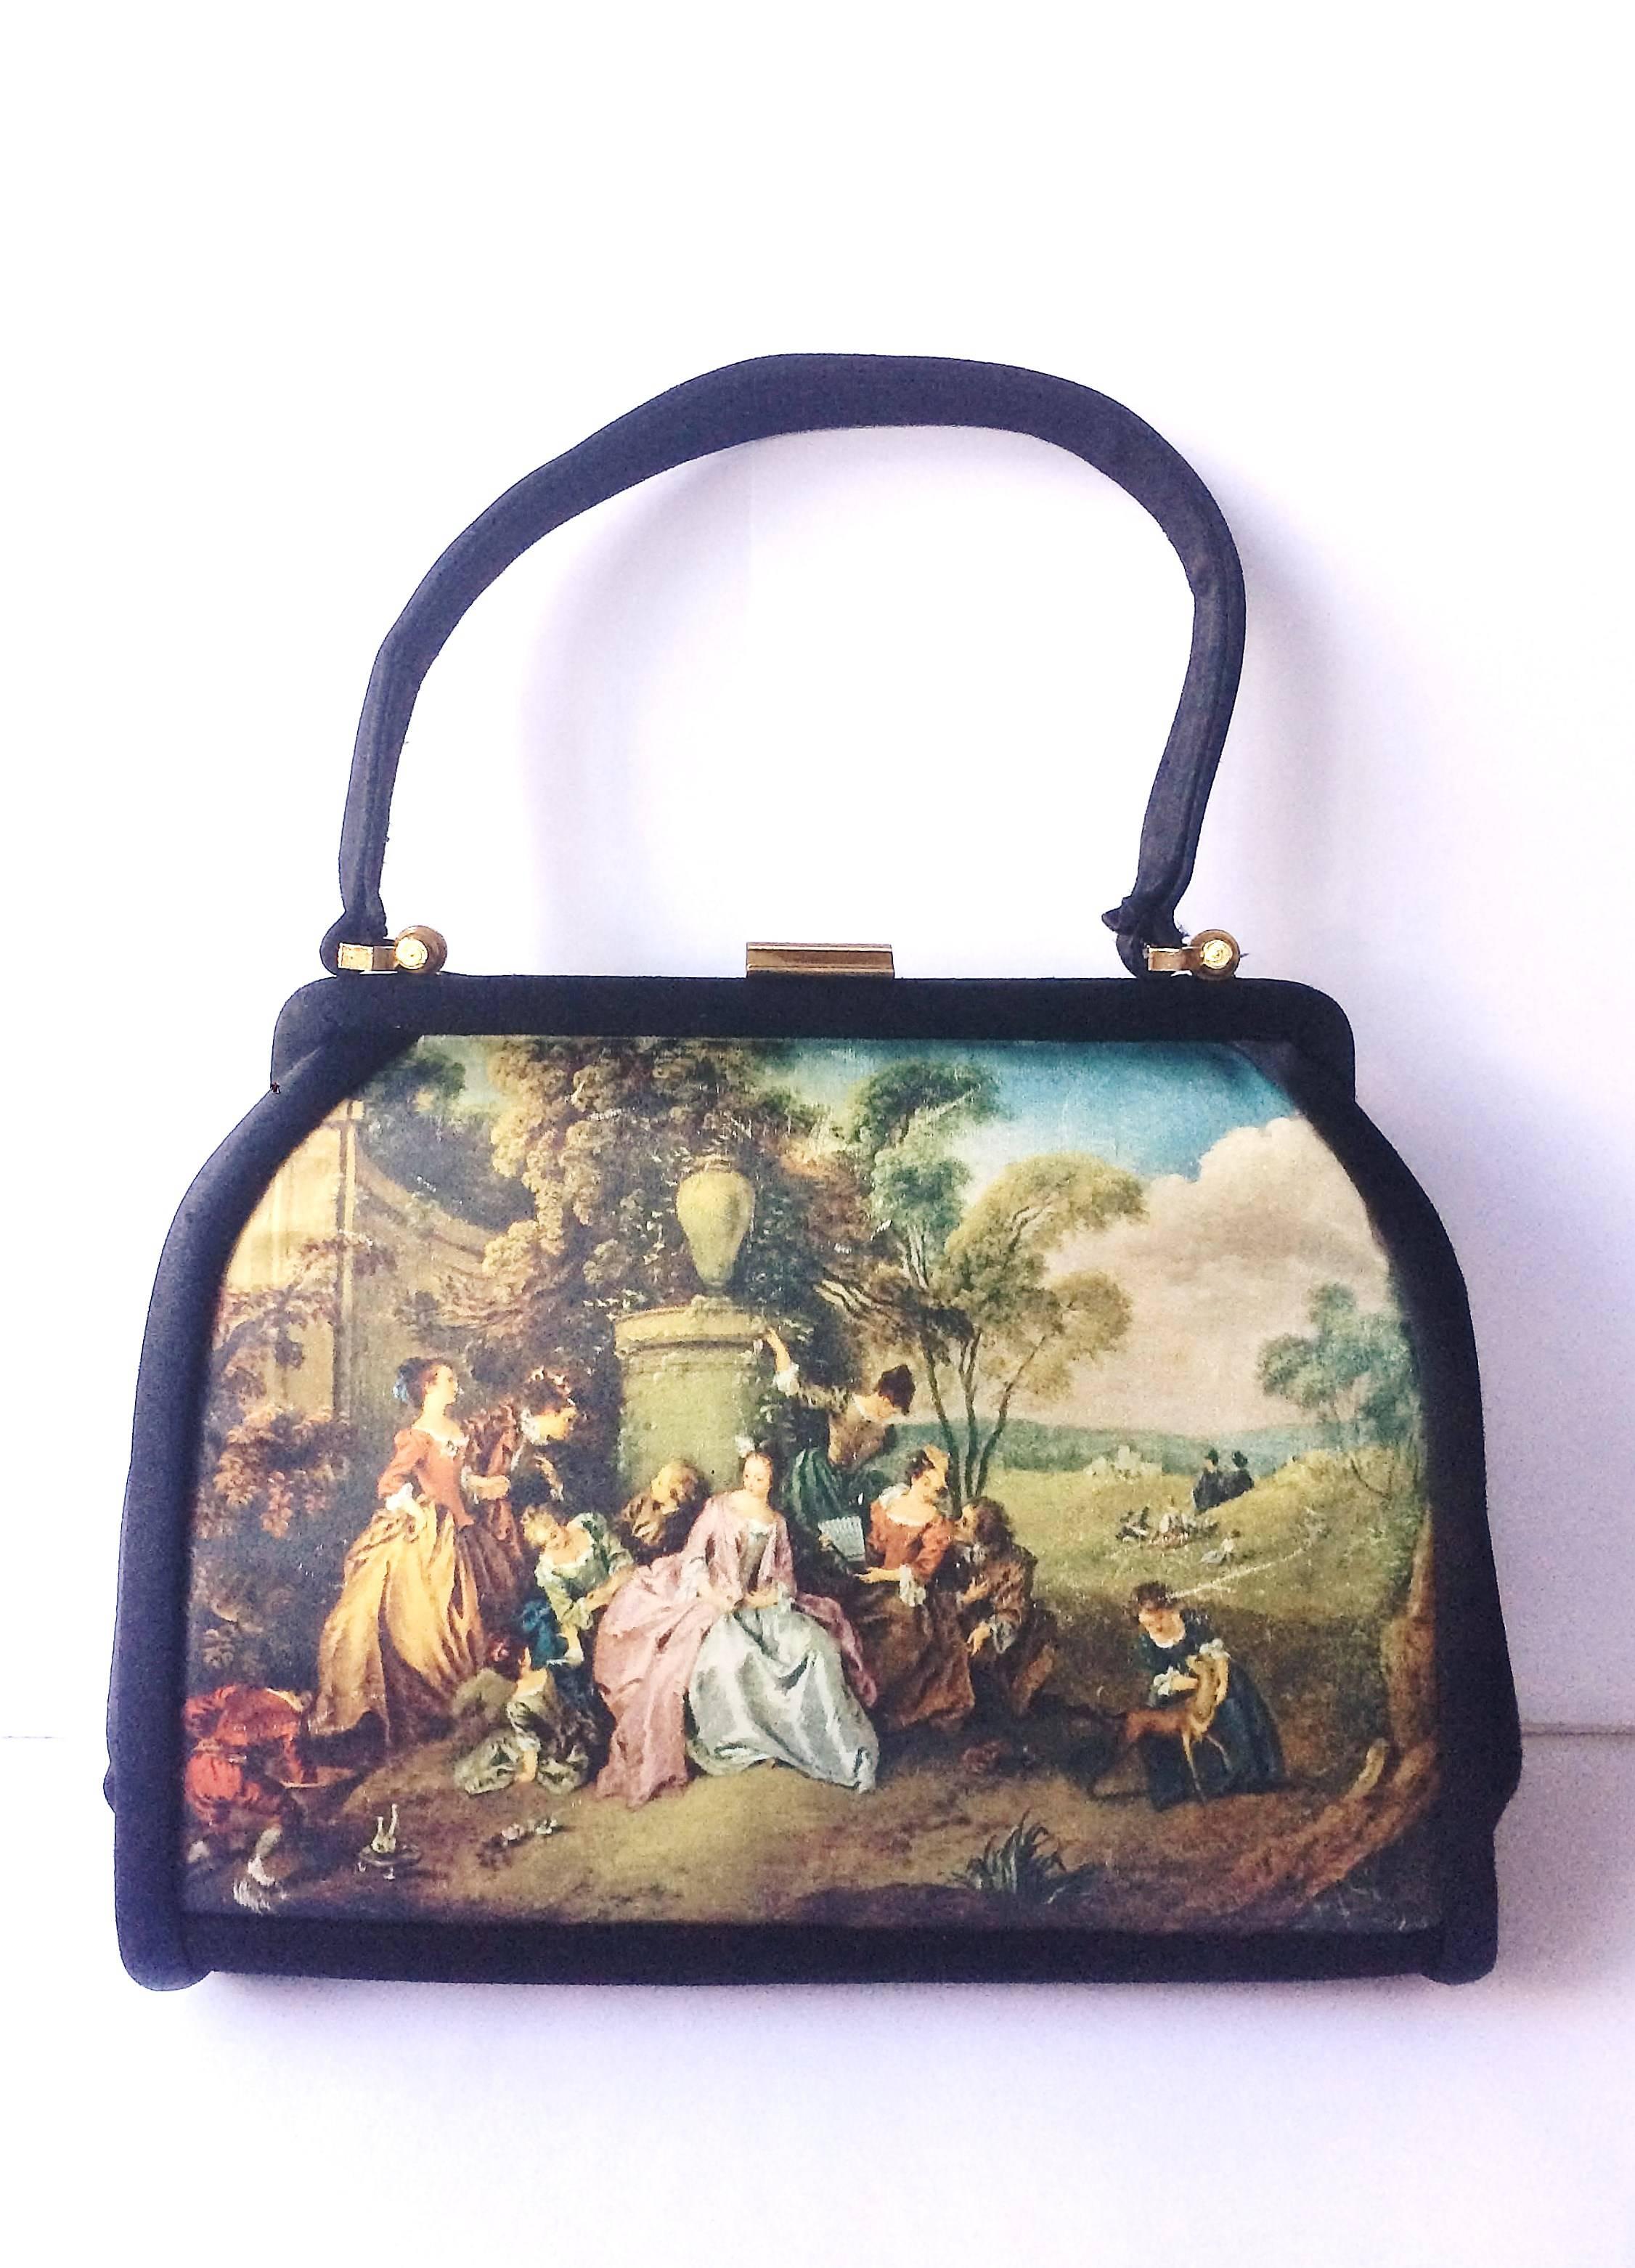 A highly unusual and elegant handbag, using a Watteau/Watteau style painting , with a compact, wallet/change purse and larger make up purse, all with 18th century French Romantic painting images ( Boucher, Watteau), made from black and printed silk,